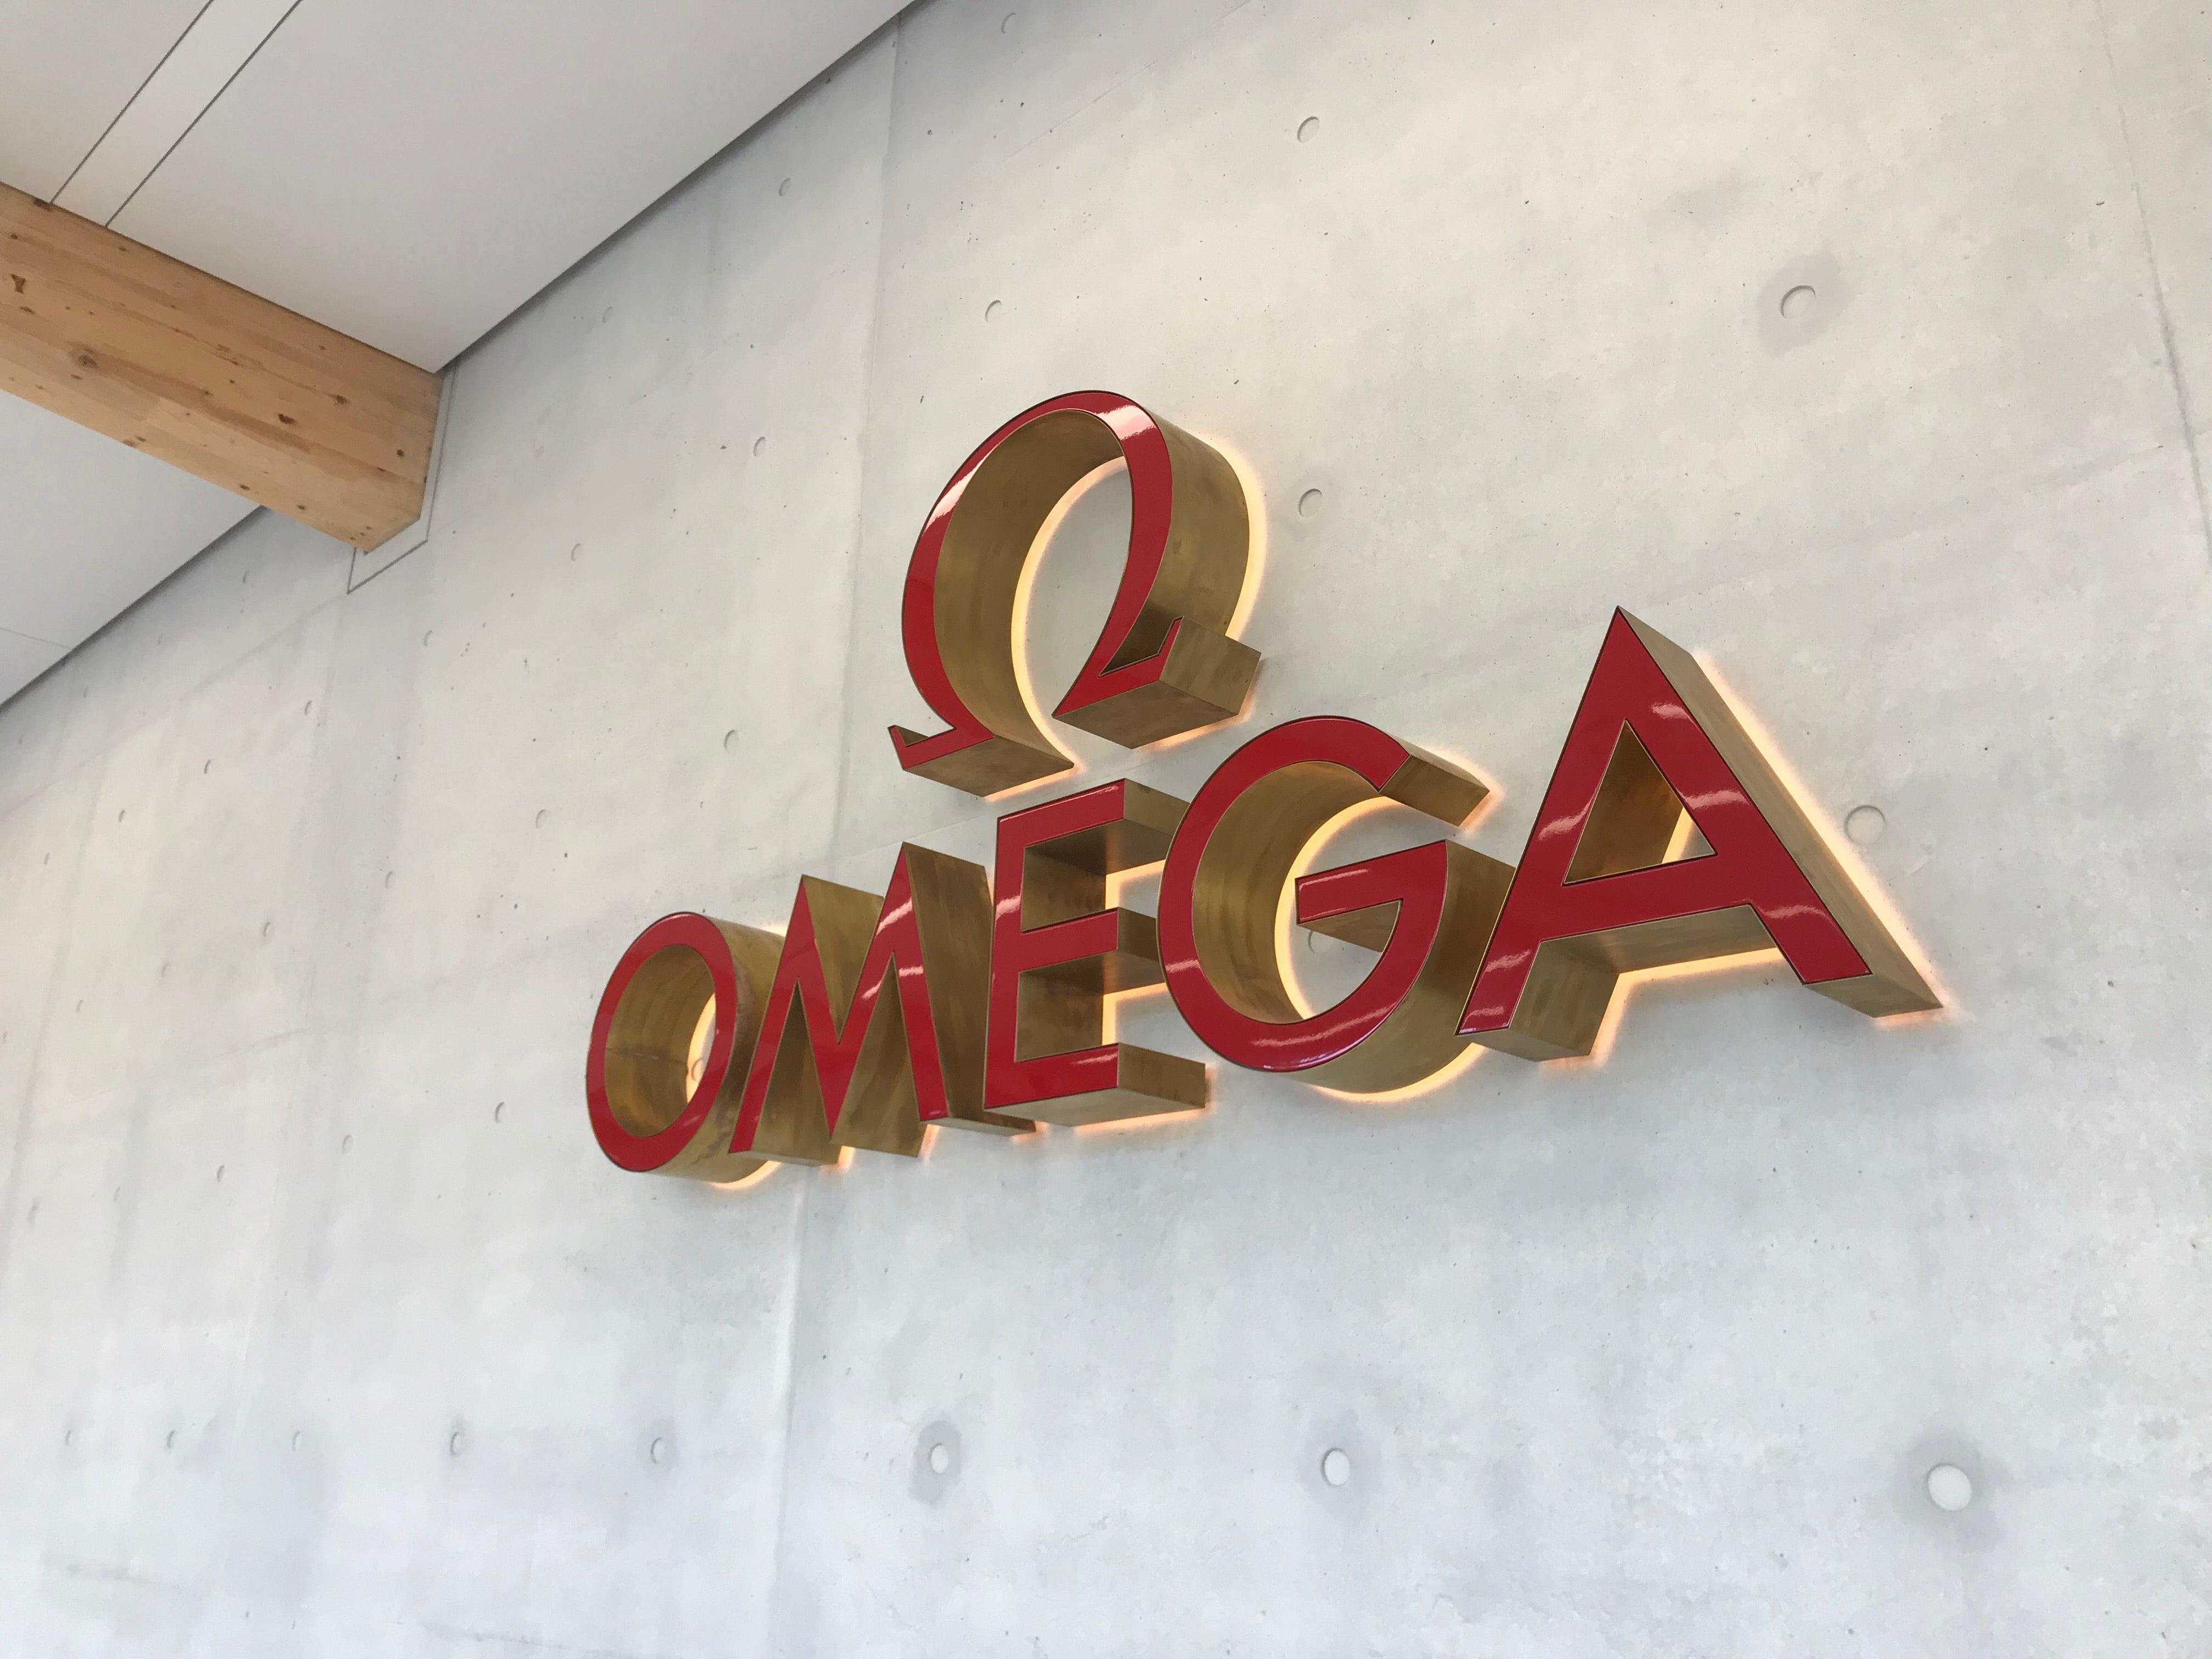 The OMEGA Factory